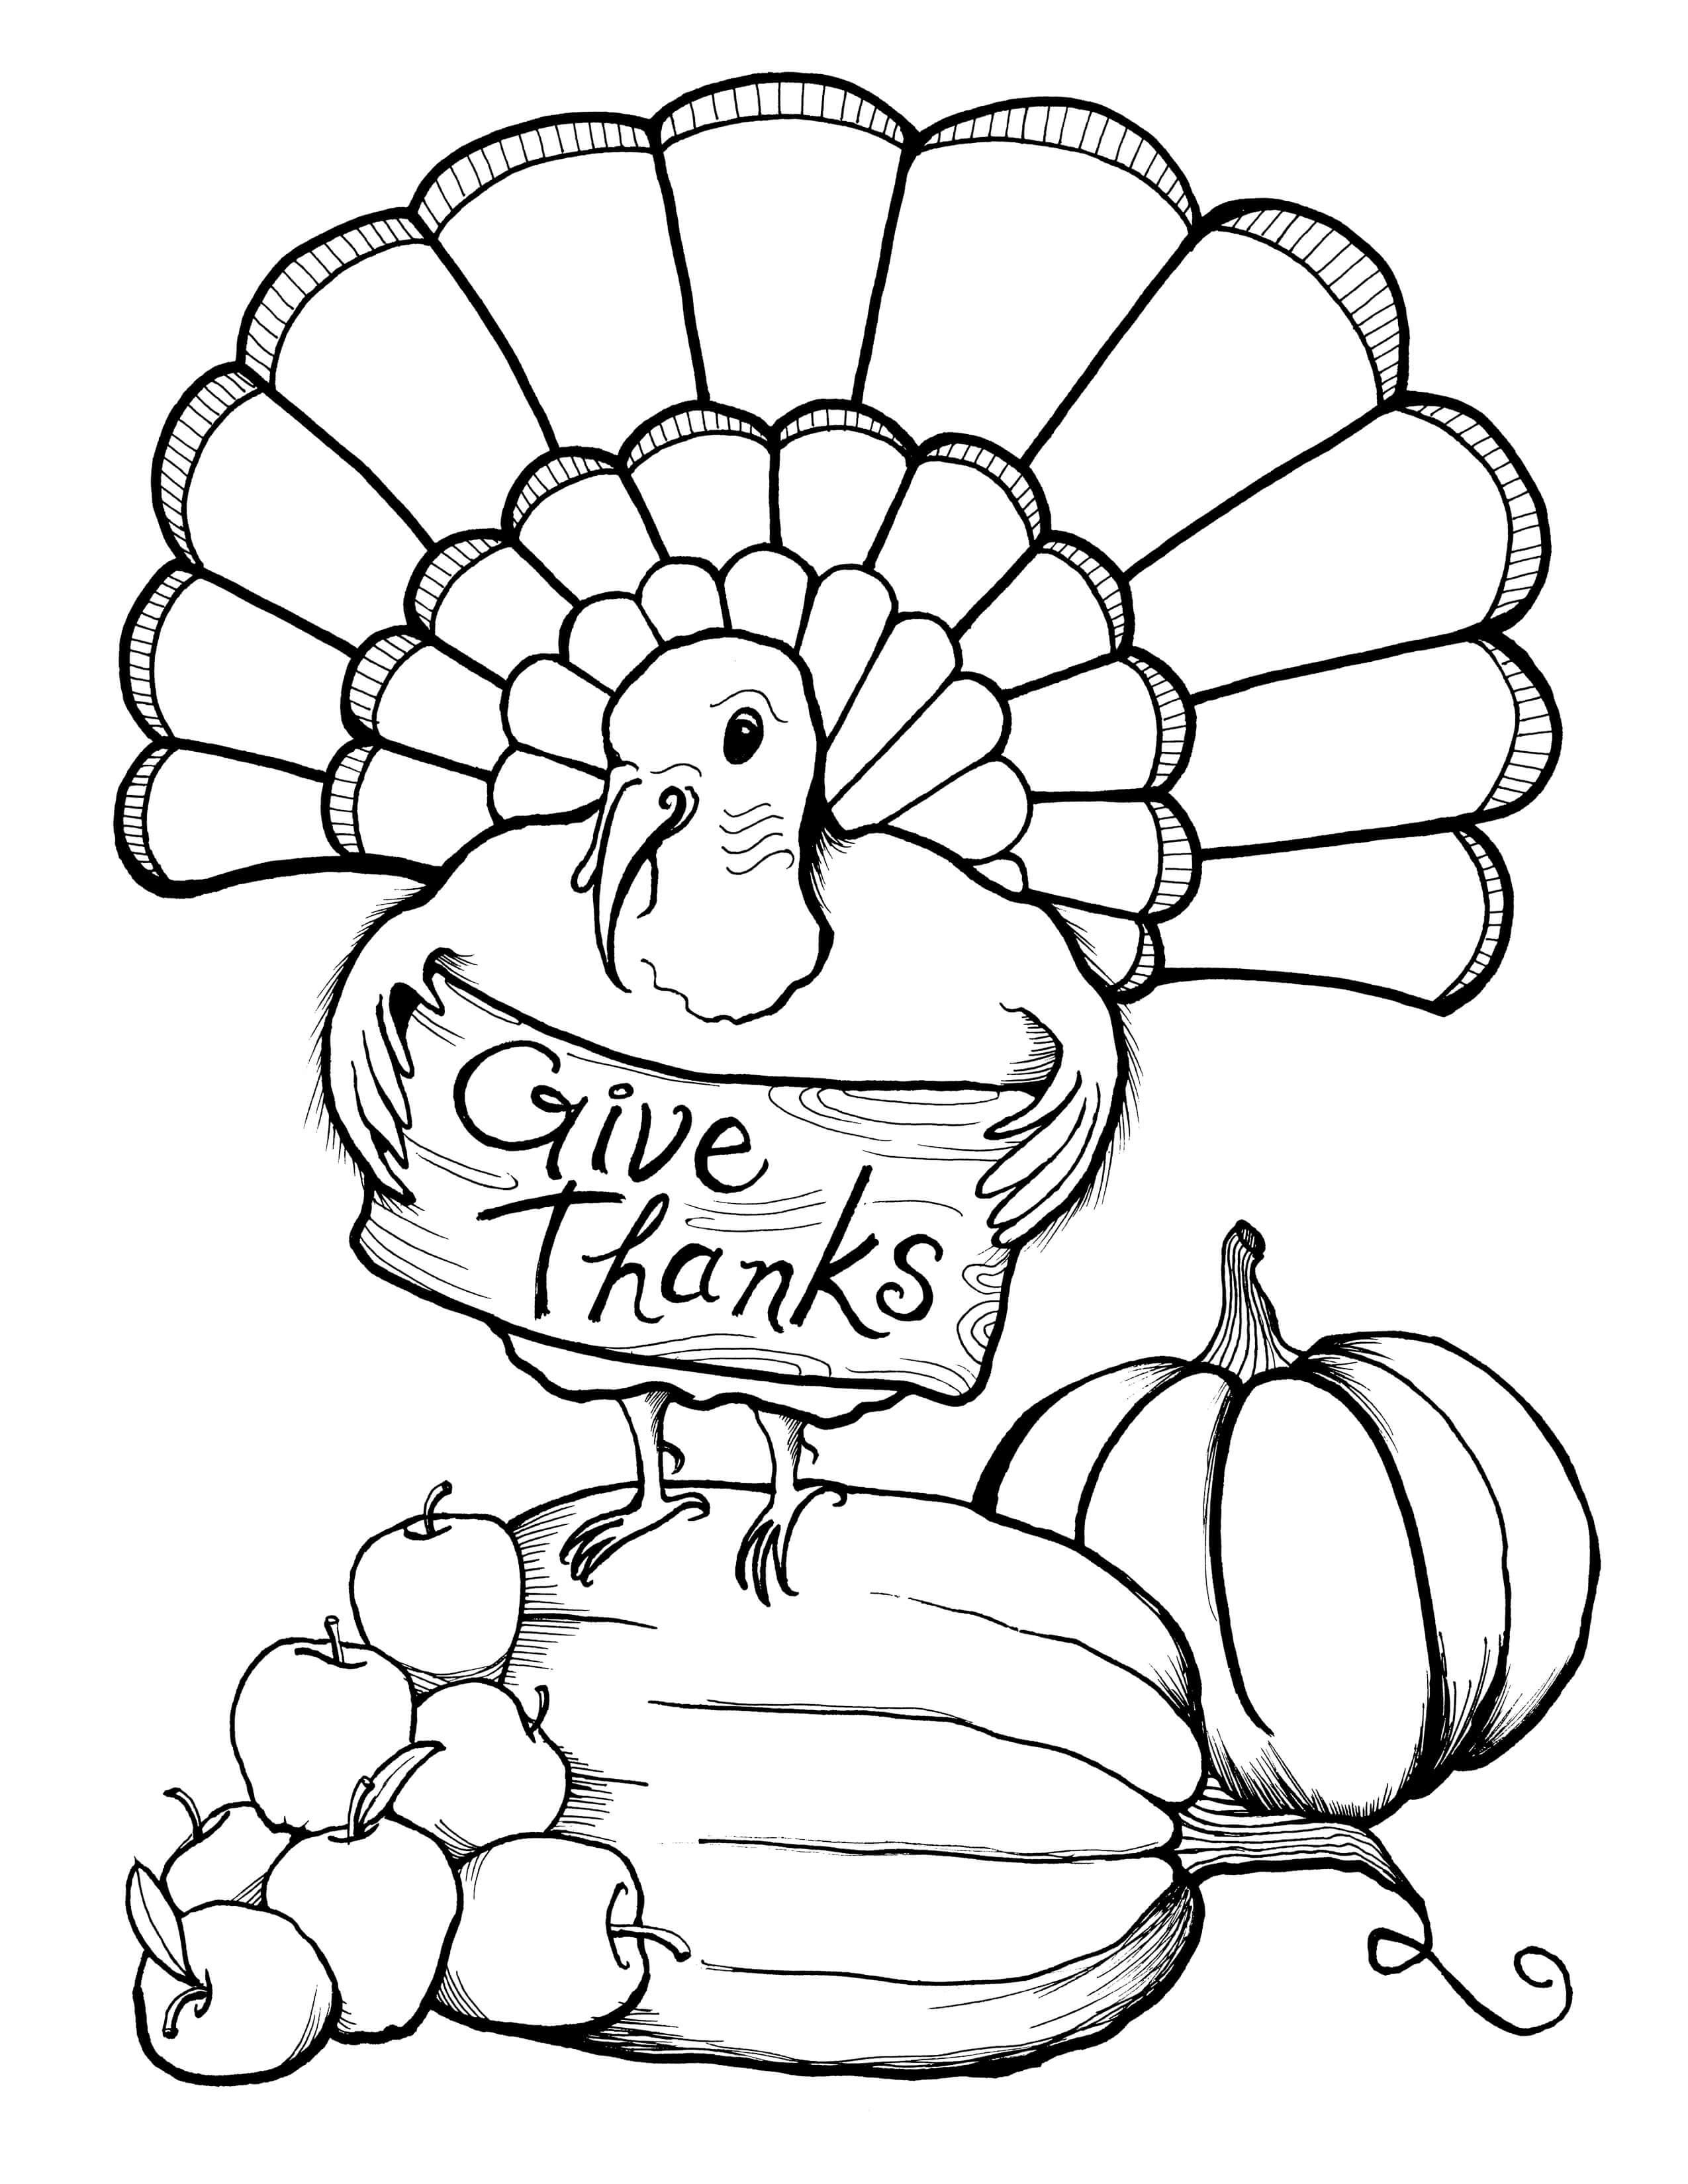 Free Printable Thanksgiving Coloring Pages For Kids - Thanksgiving 2014 Coloring Pictures Printables